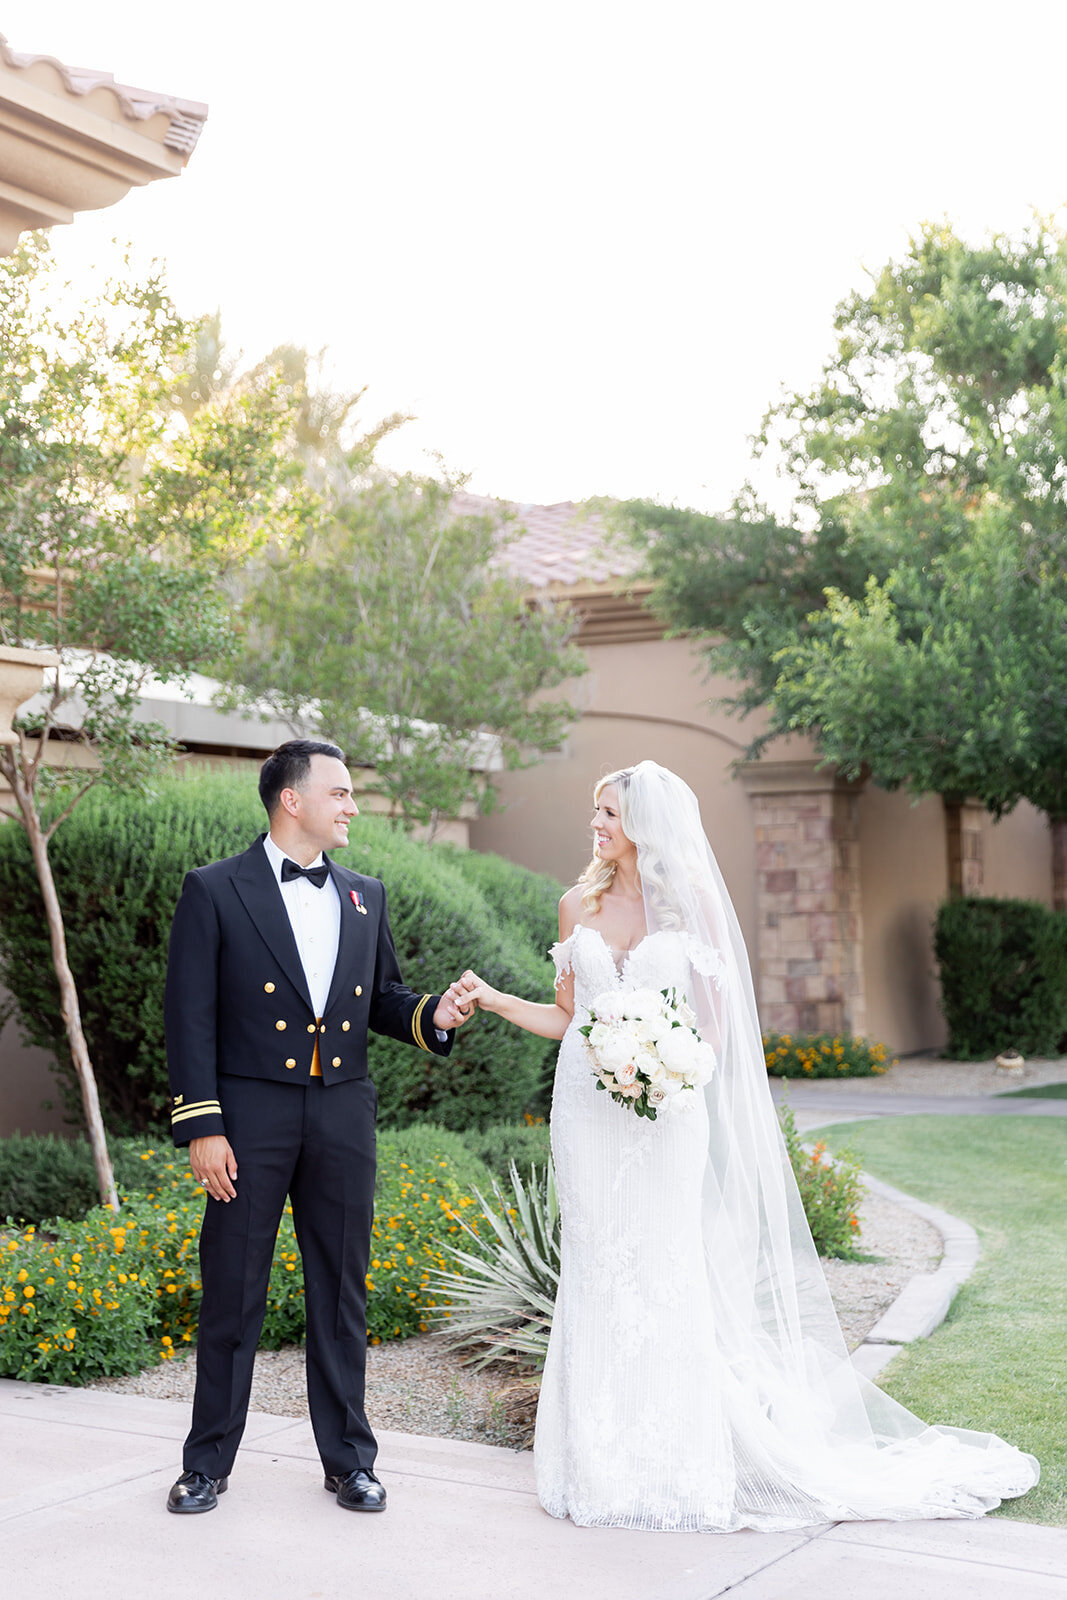 Karlie Colleen Photography - Holly & Ronnie Wedding - Seville Country Club - Gilbert Arizona-655